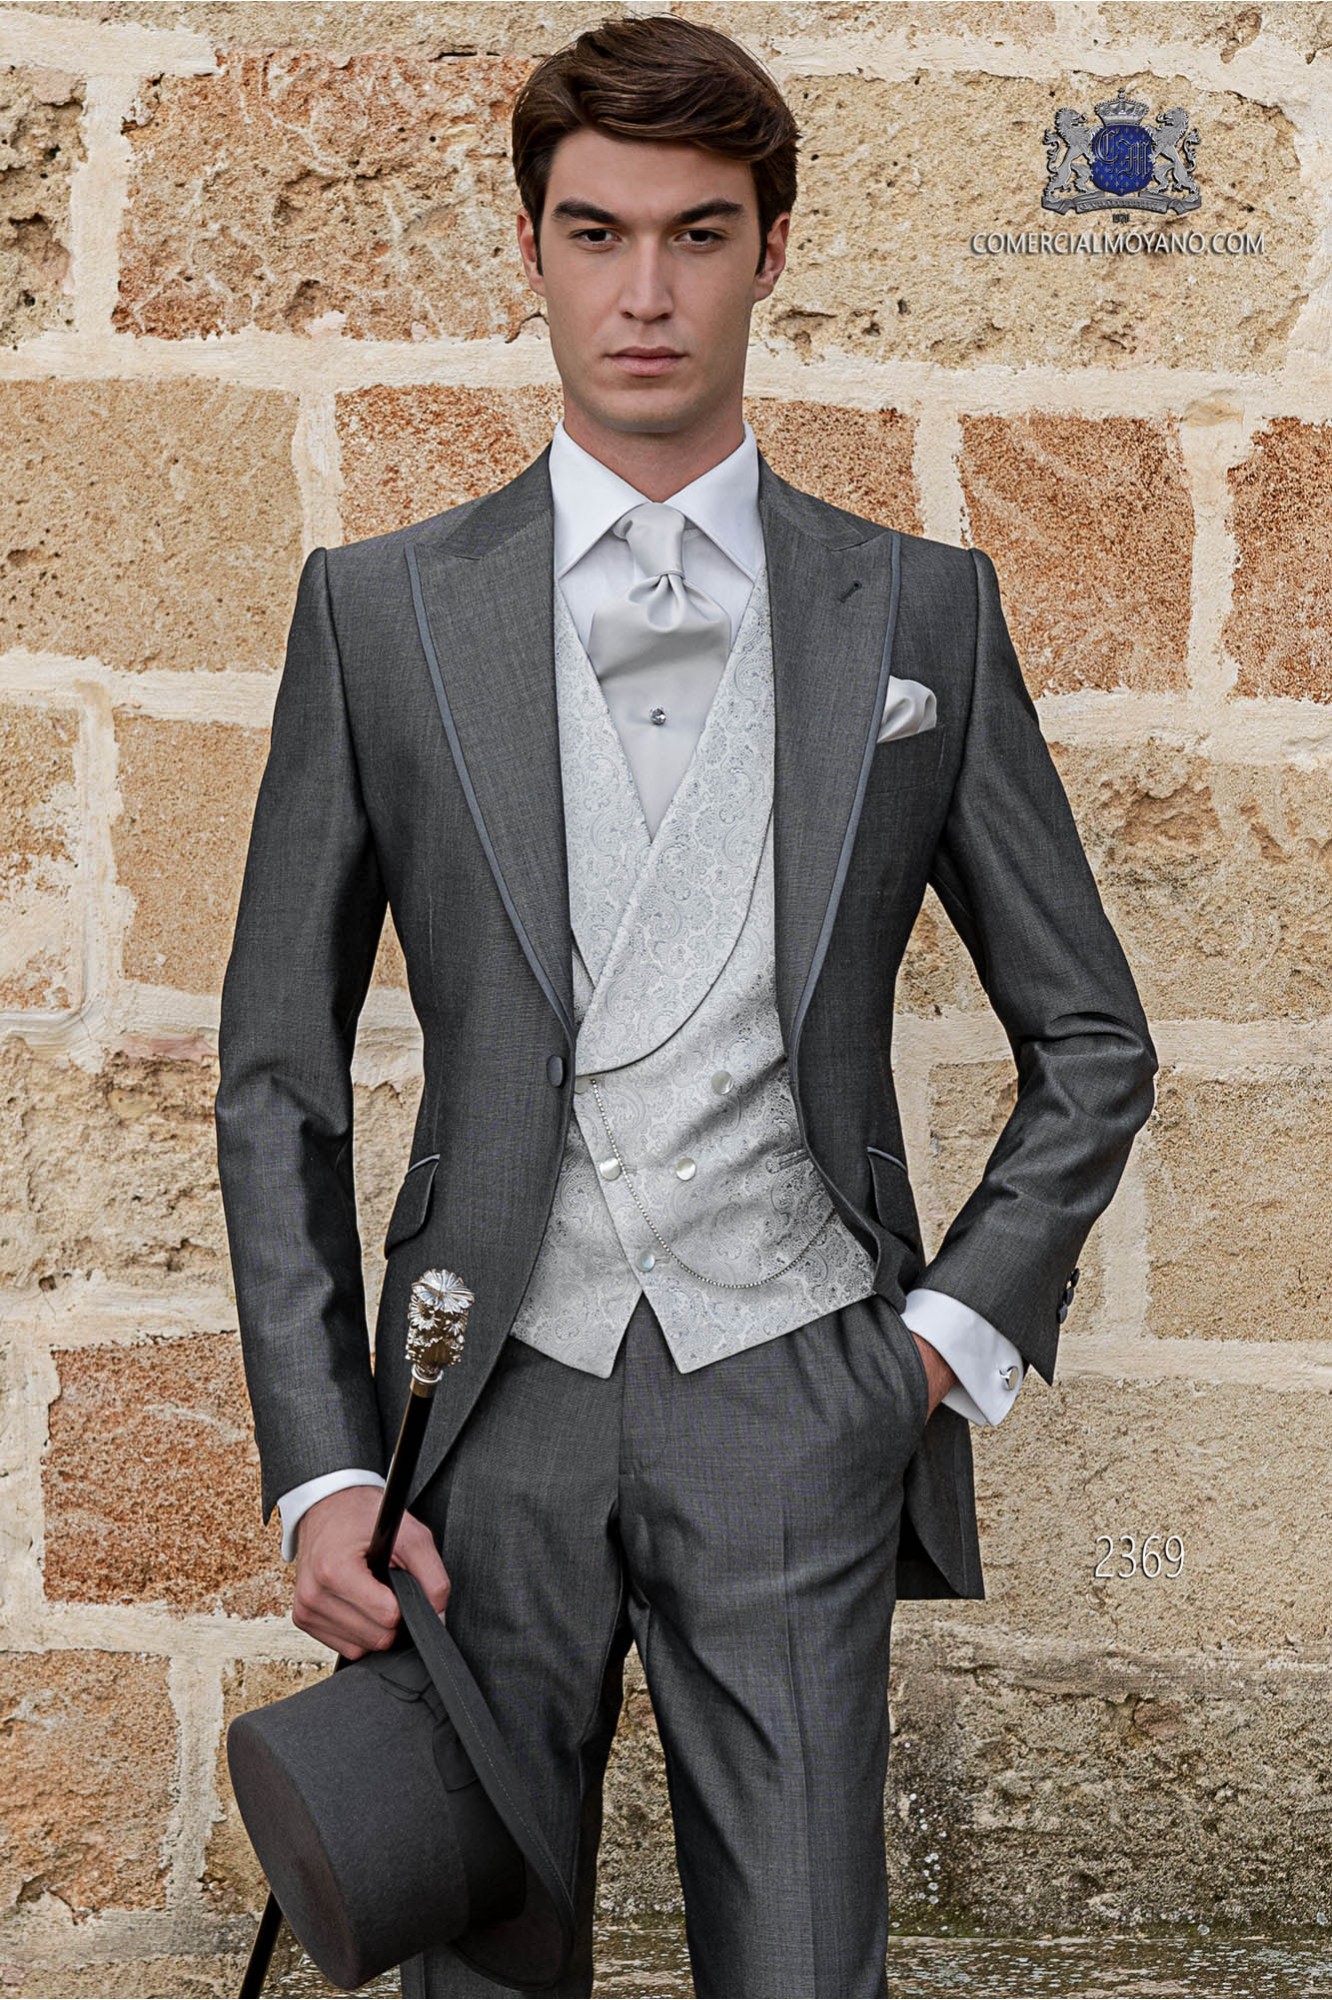 Short-tailed gray wedding suit